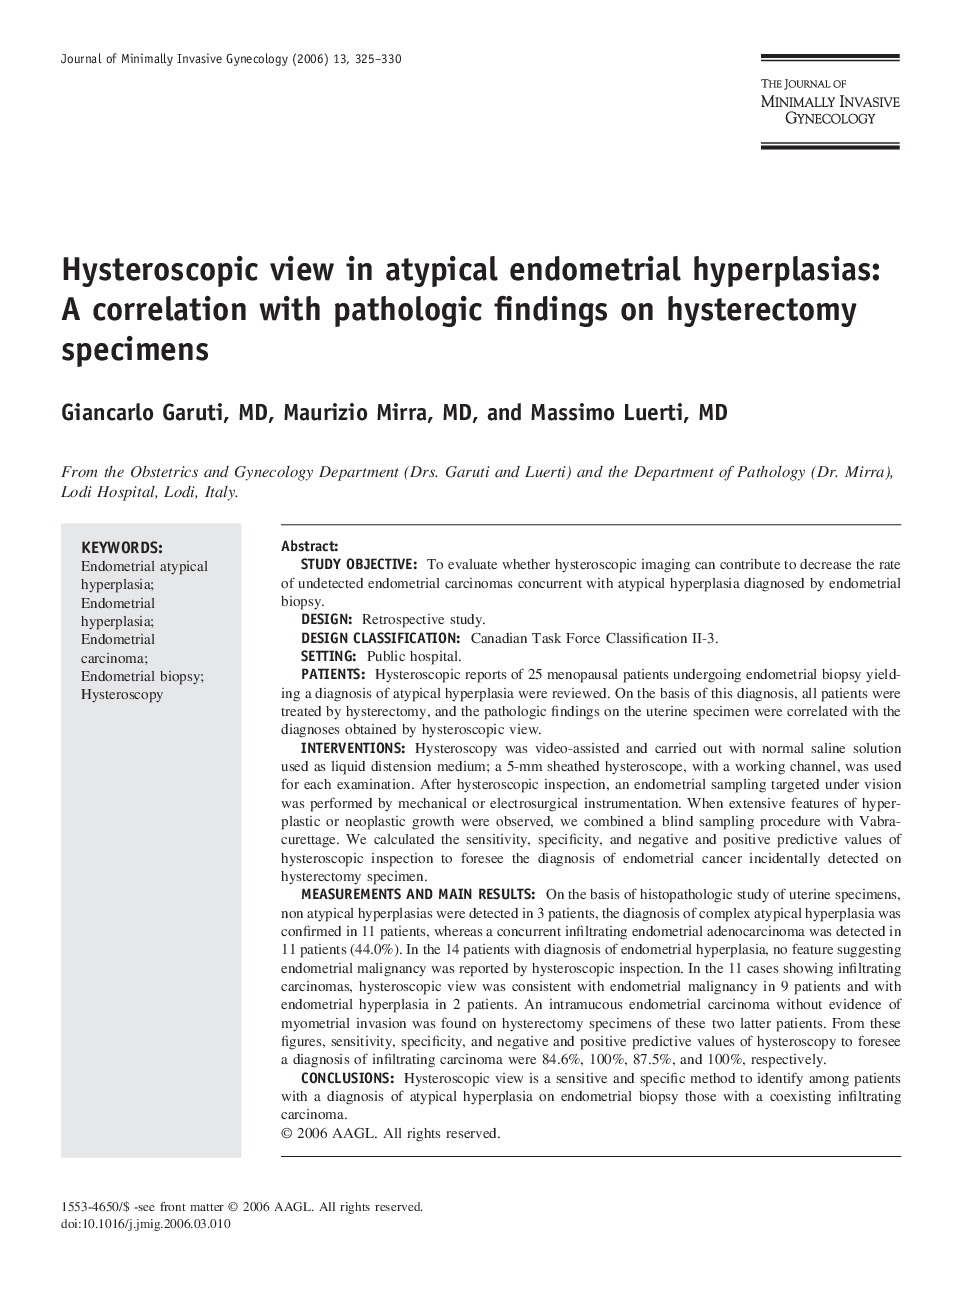 Hysteroscopic view in atypical endometrial hyperplasias: A correlation with pathologic findings on hysterectomy specimens